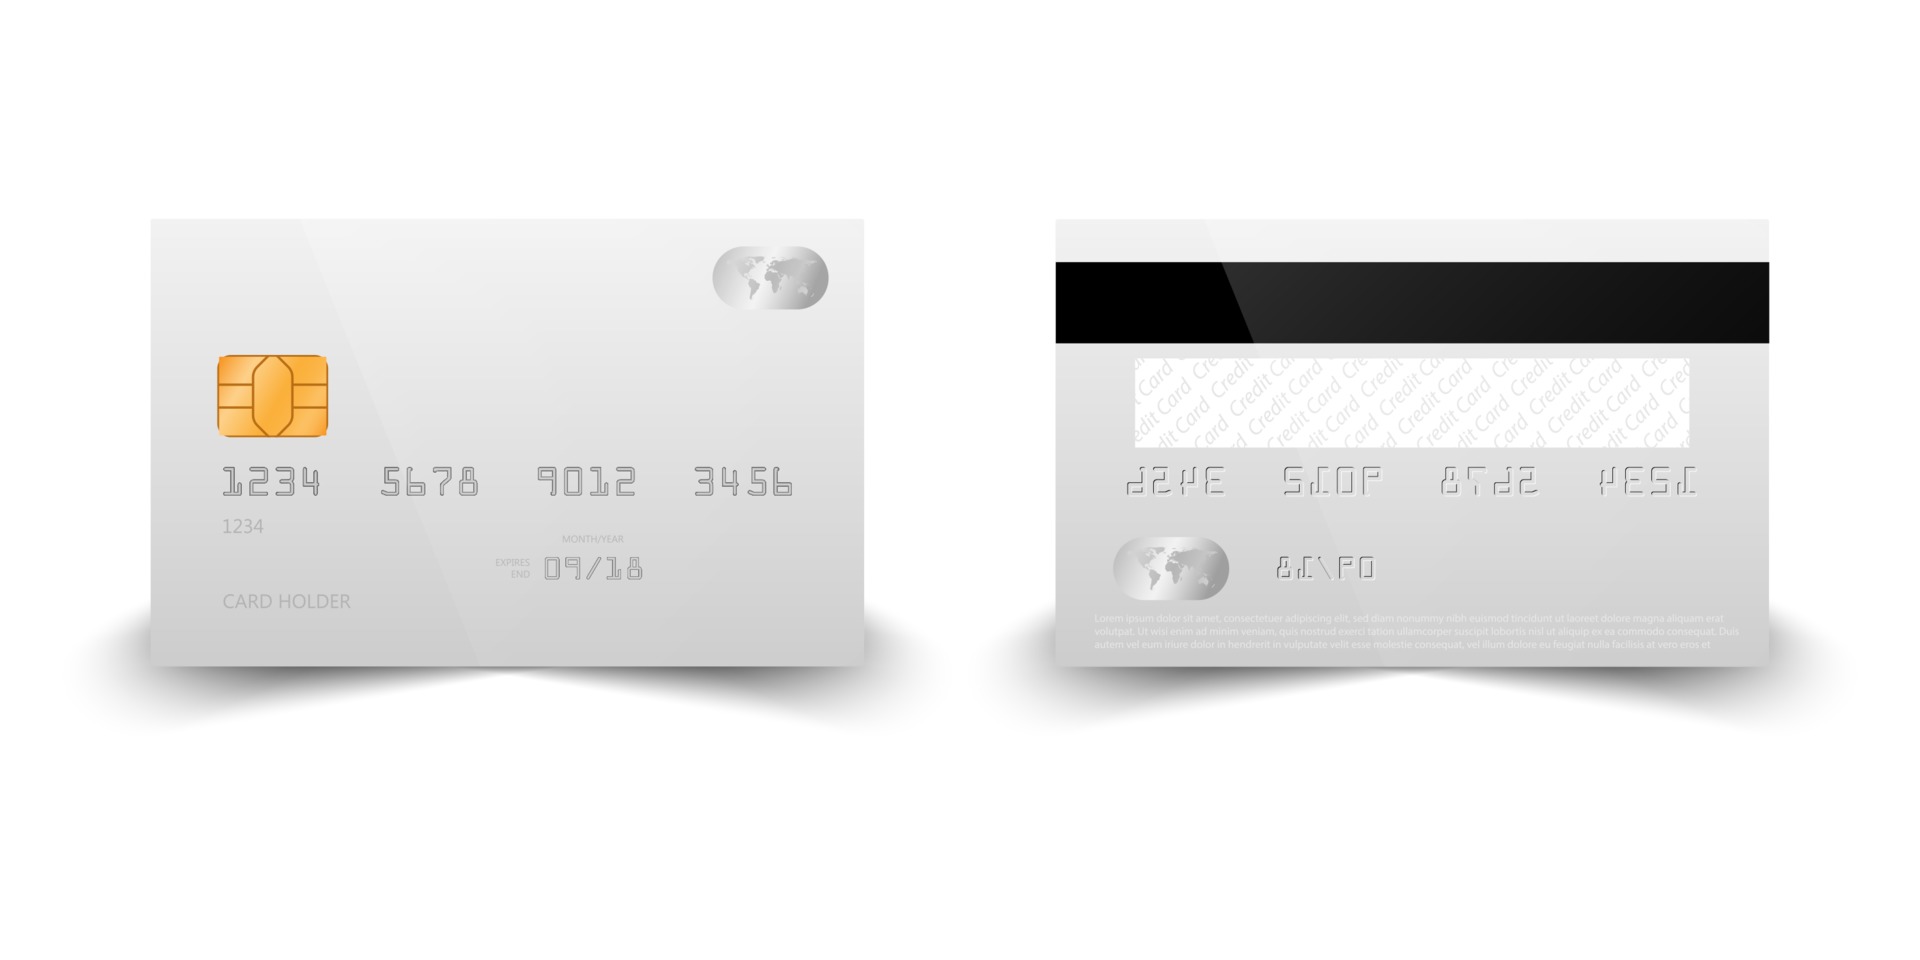 Credit card front and back view